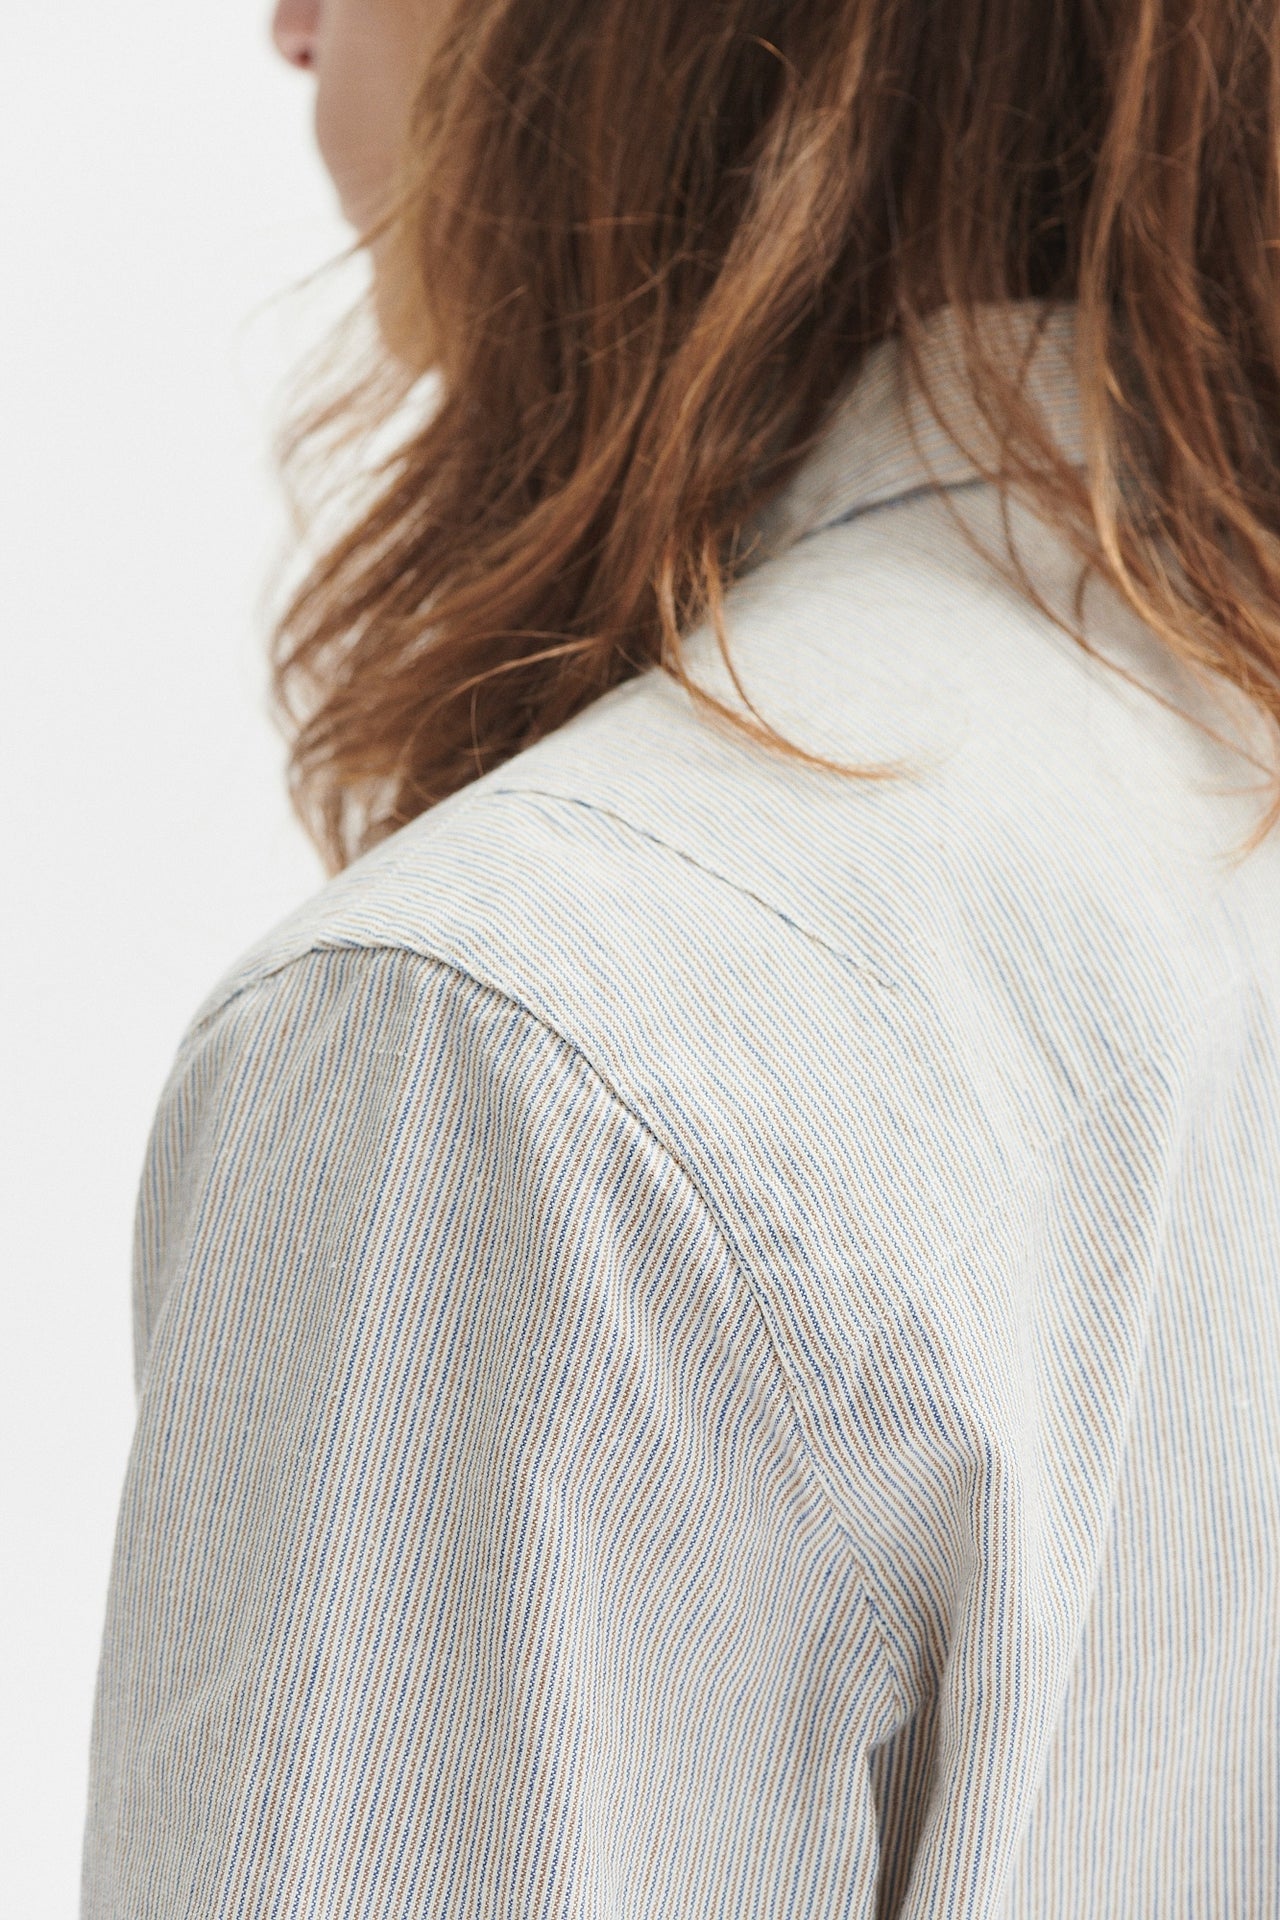 Feel Good Shirt  in a Subtle Light Brown Cream and Blue Striped Vintage Portuguese Cotton